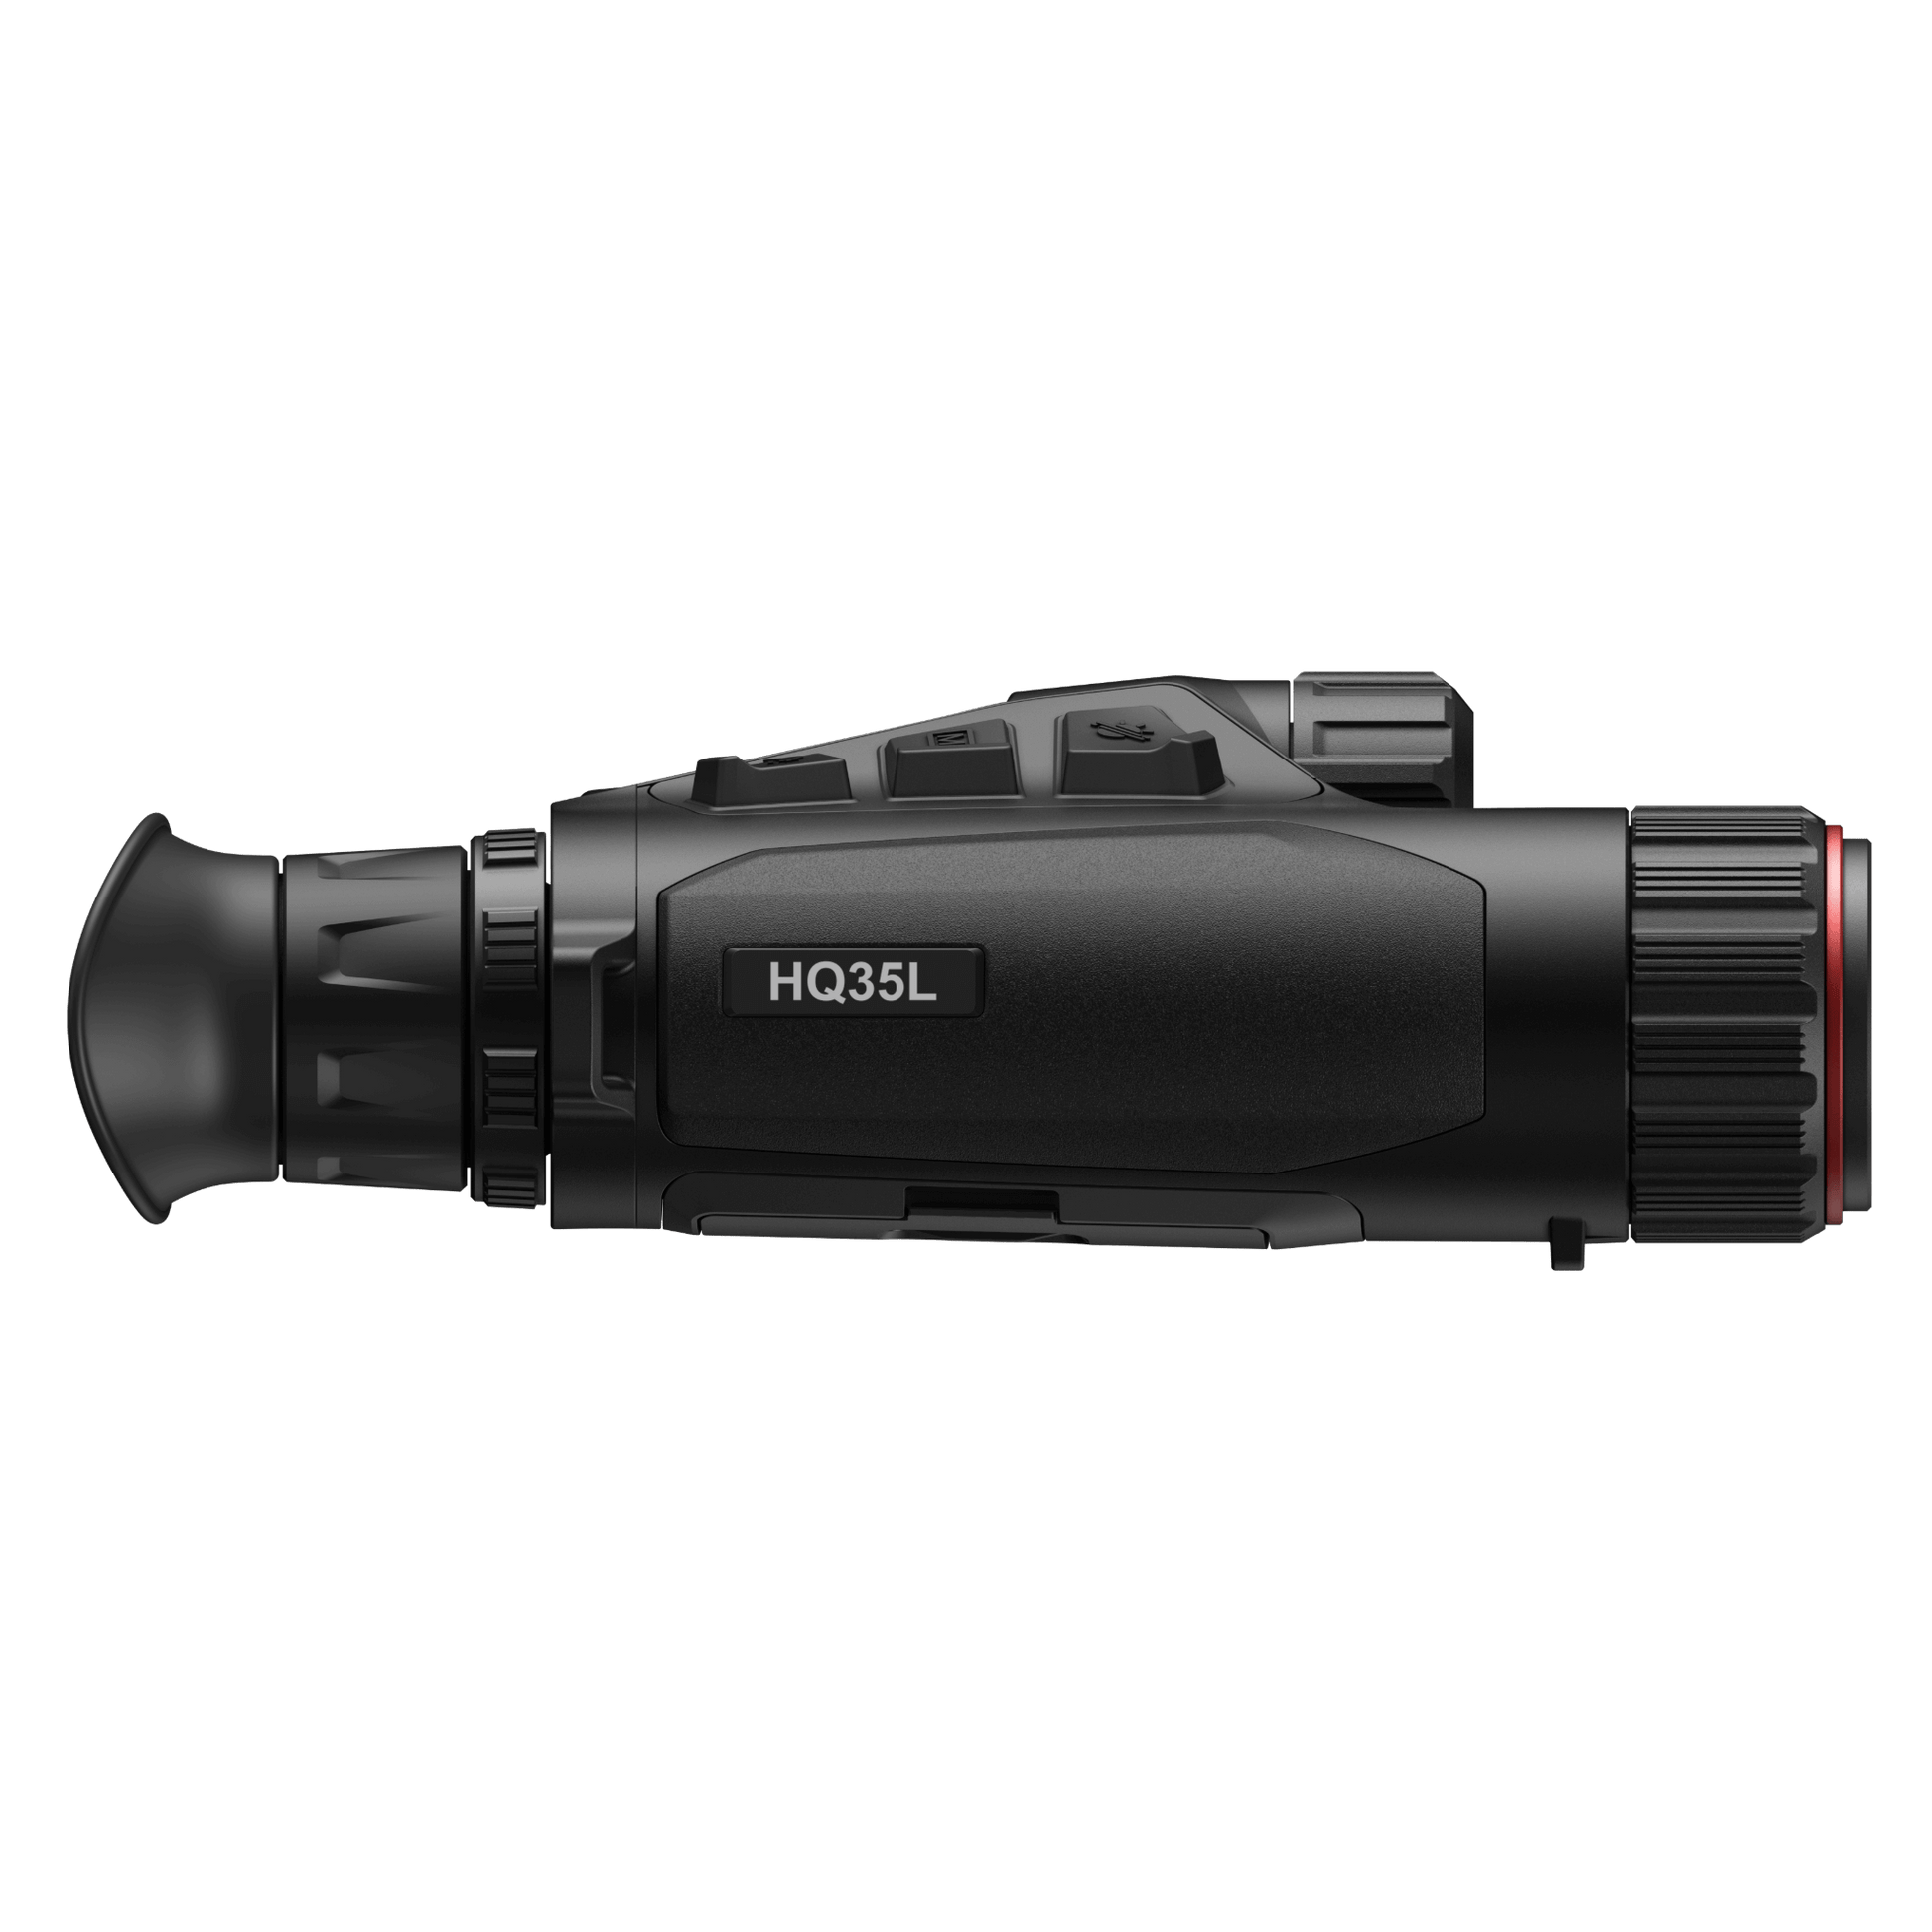 HikMicro Habrok HQ35L Multi-Function Night Vision Thermal Binoculars - Right Side View